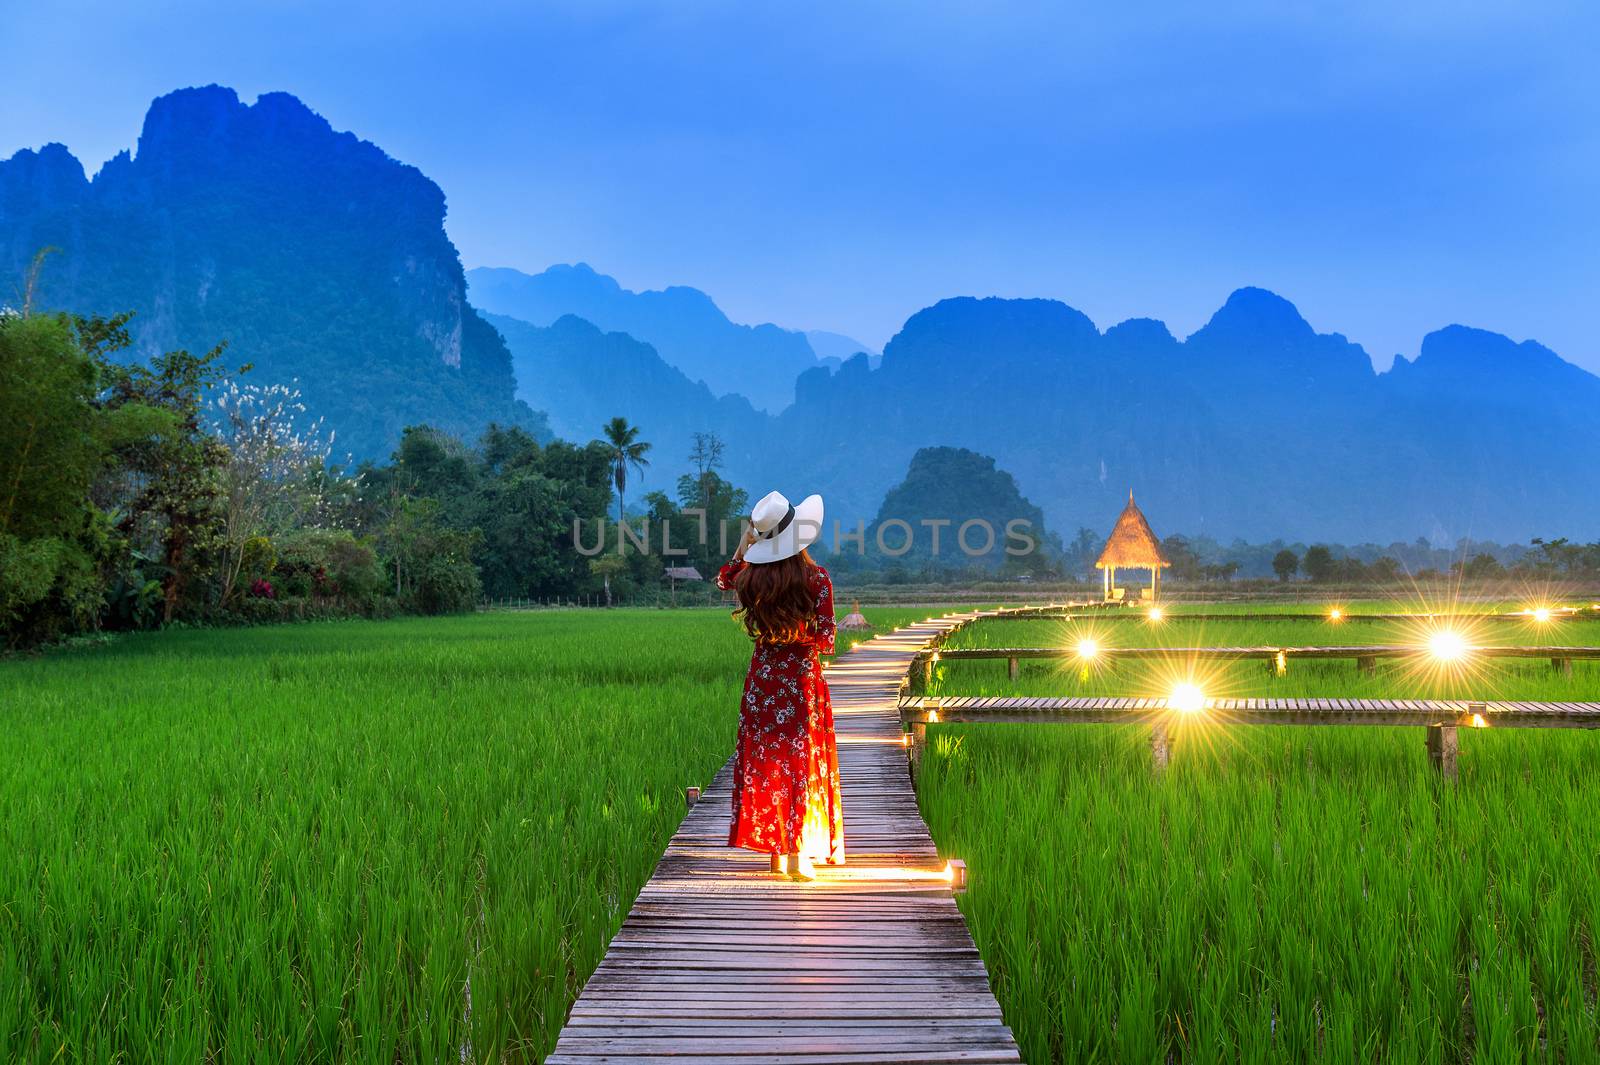 Young woman walking on wooden path with green rice field in Vang Vieng, Laos. by gutarphotoghaphy